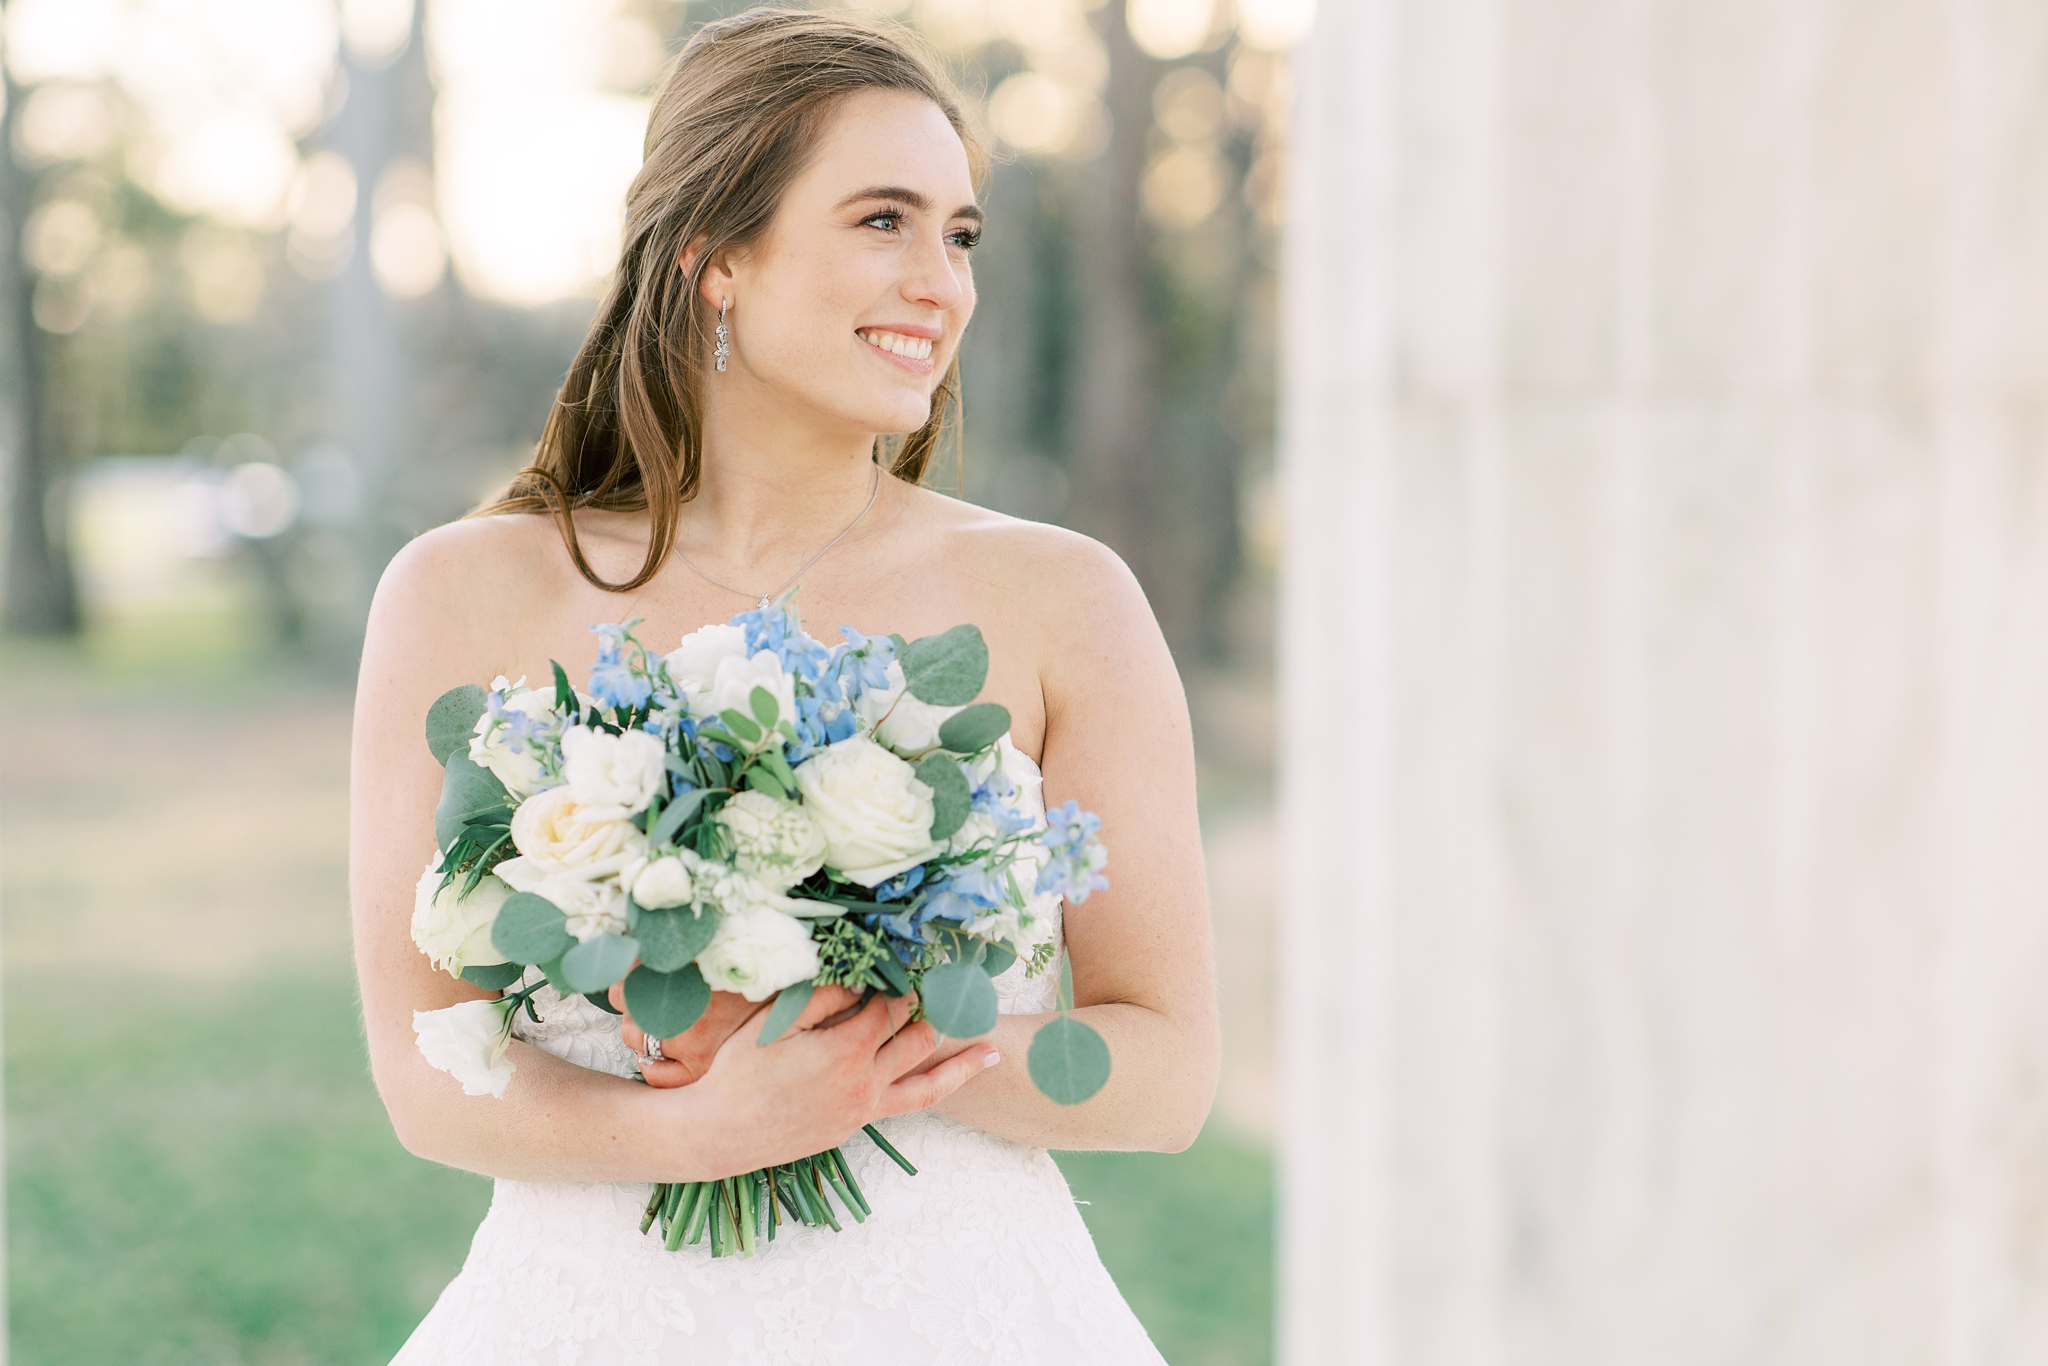 A romantic winter wedding across Washington, DC including St Matthews Cathedral, the DC War Memorial, and the National Museum of Women in the Arts.